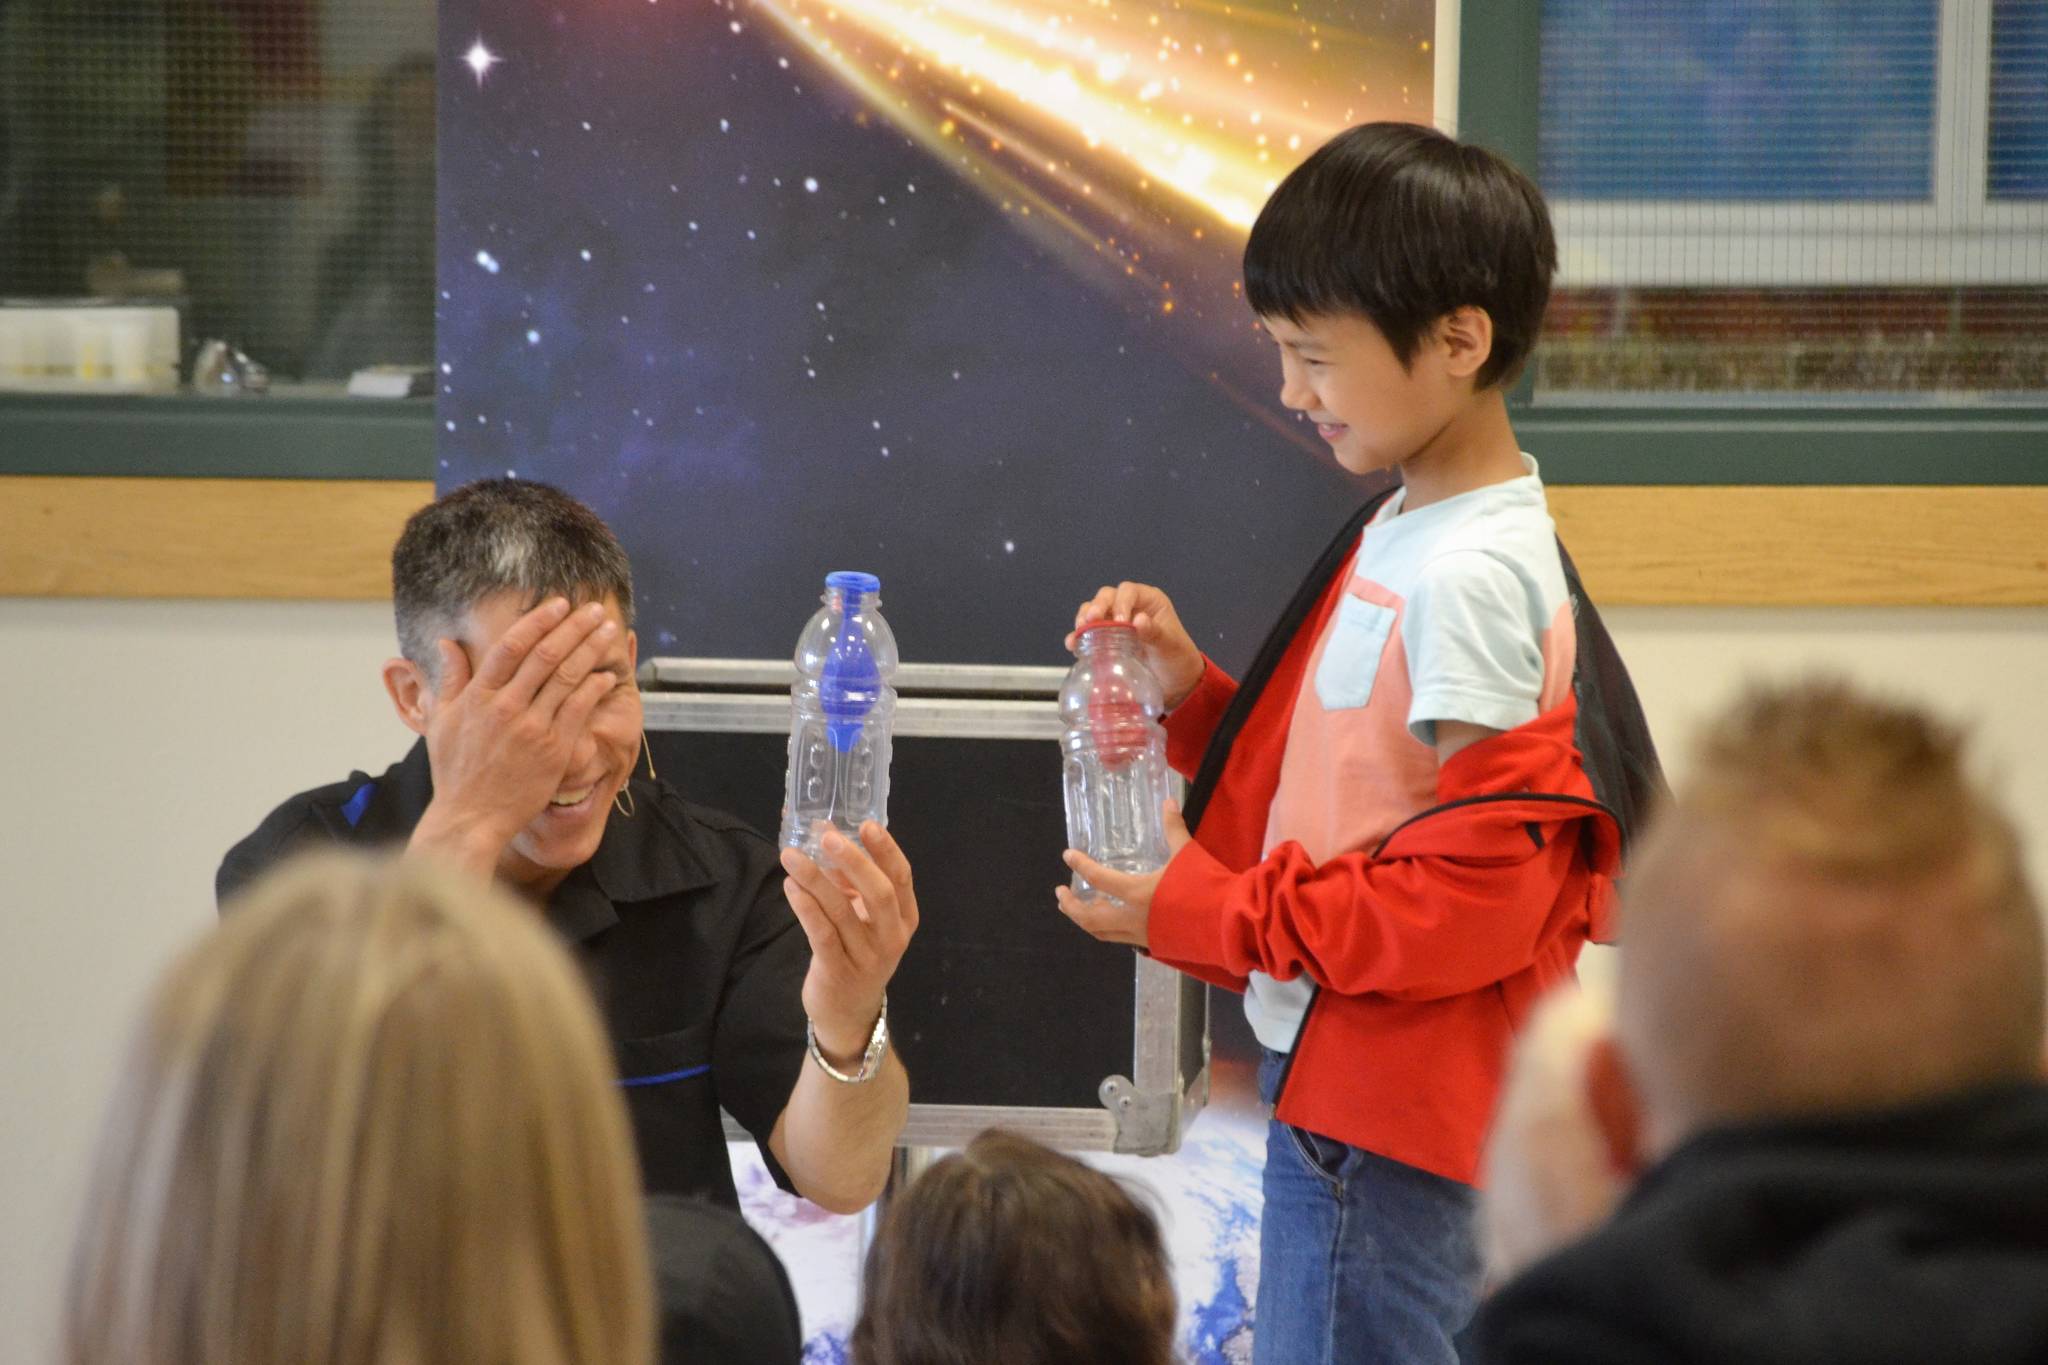 Sequim’s Mason Blake receives a lesson on air pressure and how air travels from magician Jeff Evans during the North Olympic Library System’s Summer Reading Program on June 22. The program continues in Sequim on June 29 with Storytime at the Sequim Farmers Market. Sequim Gazette photo by Matthew Nash